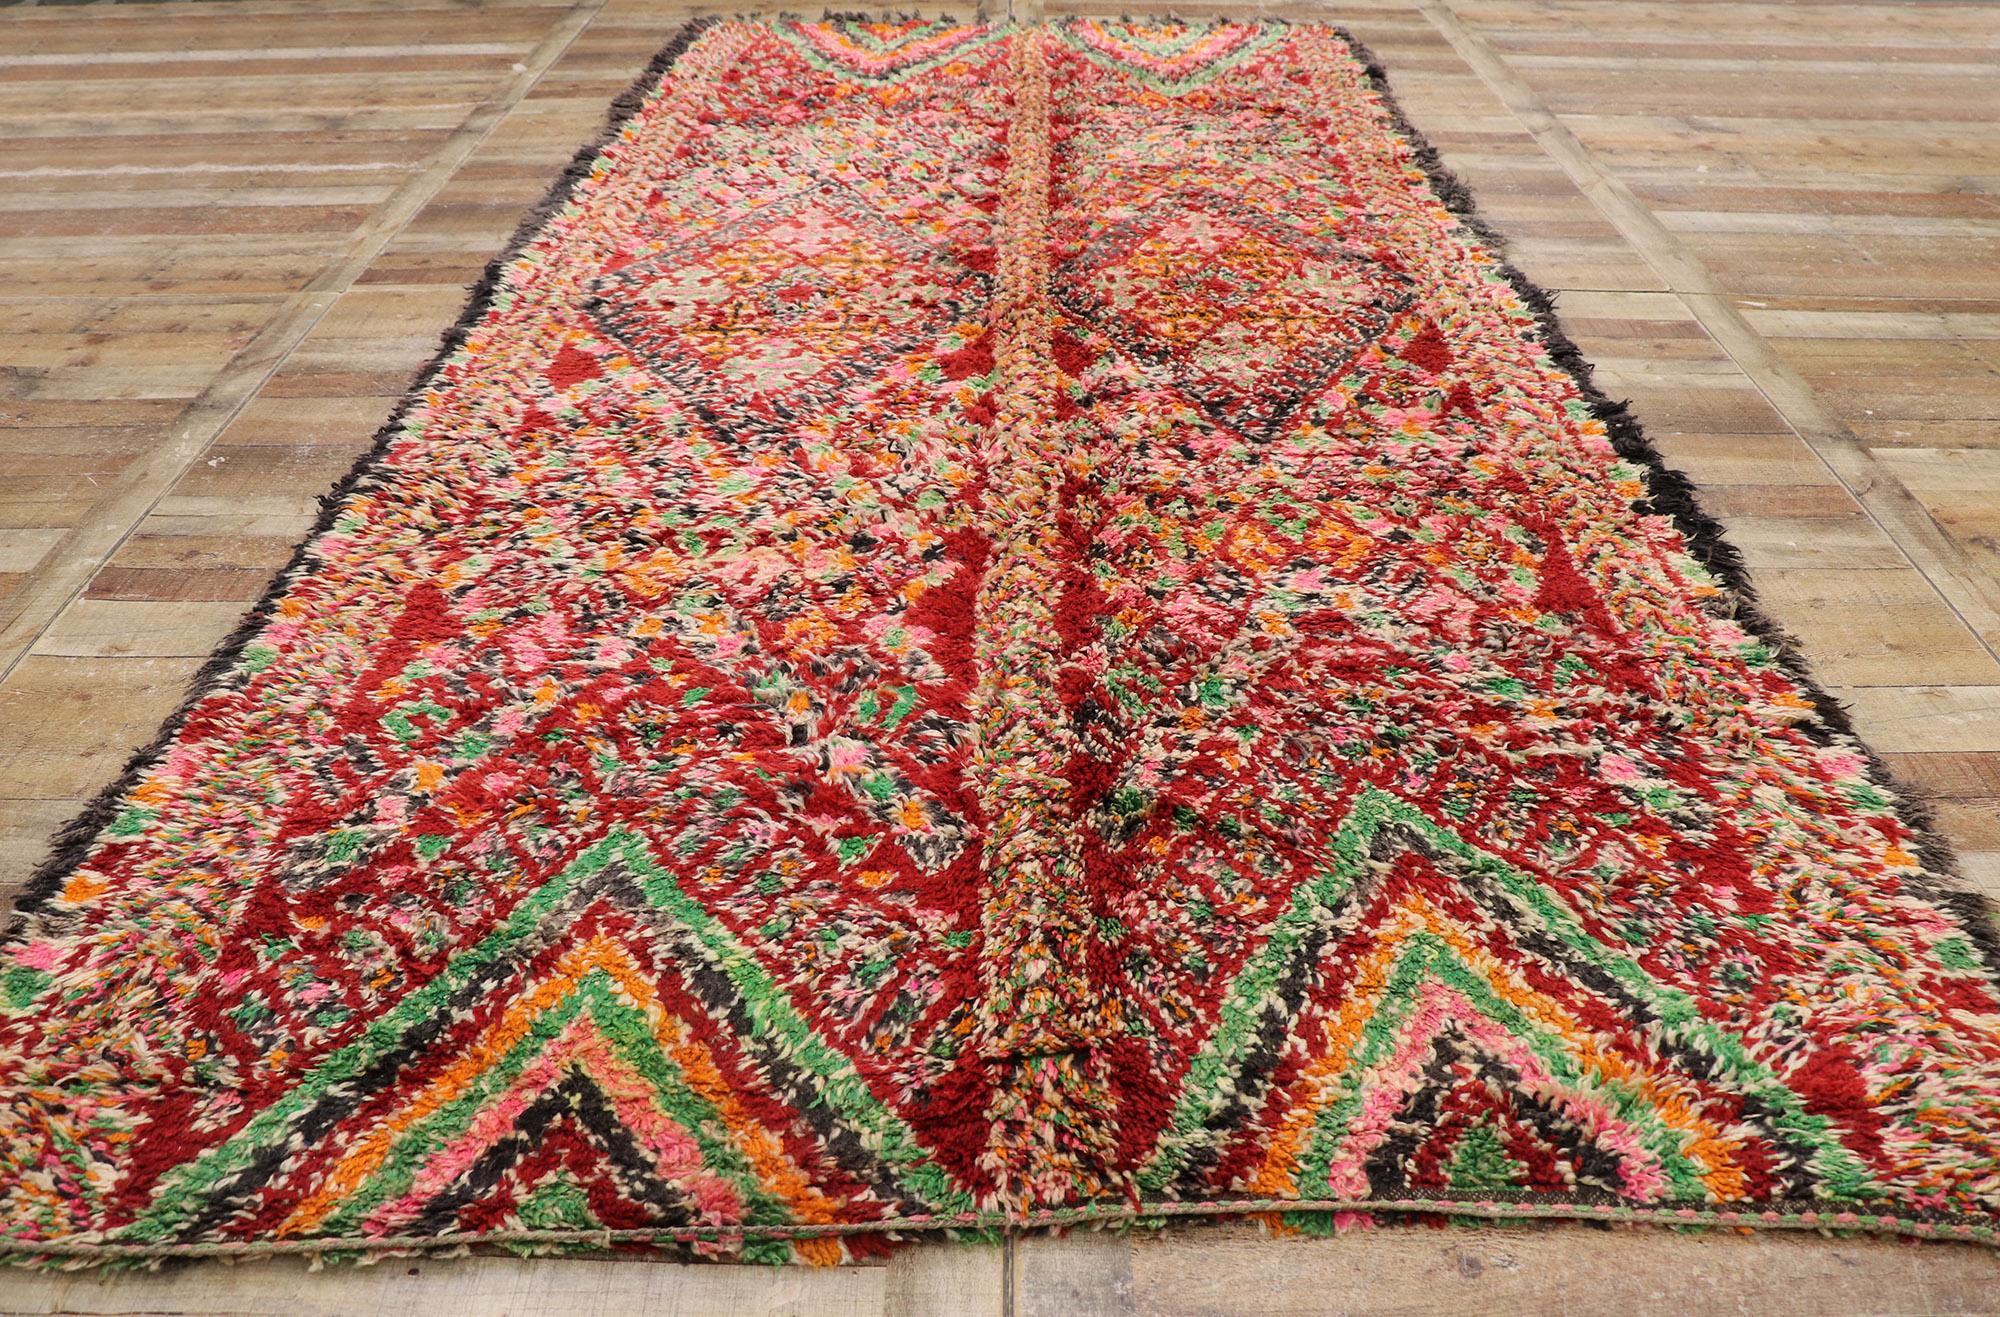 Vintage Berber Beni M'guild Moroccan Rug with Boho Chic Tribal Style For Sale 1